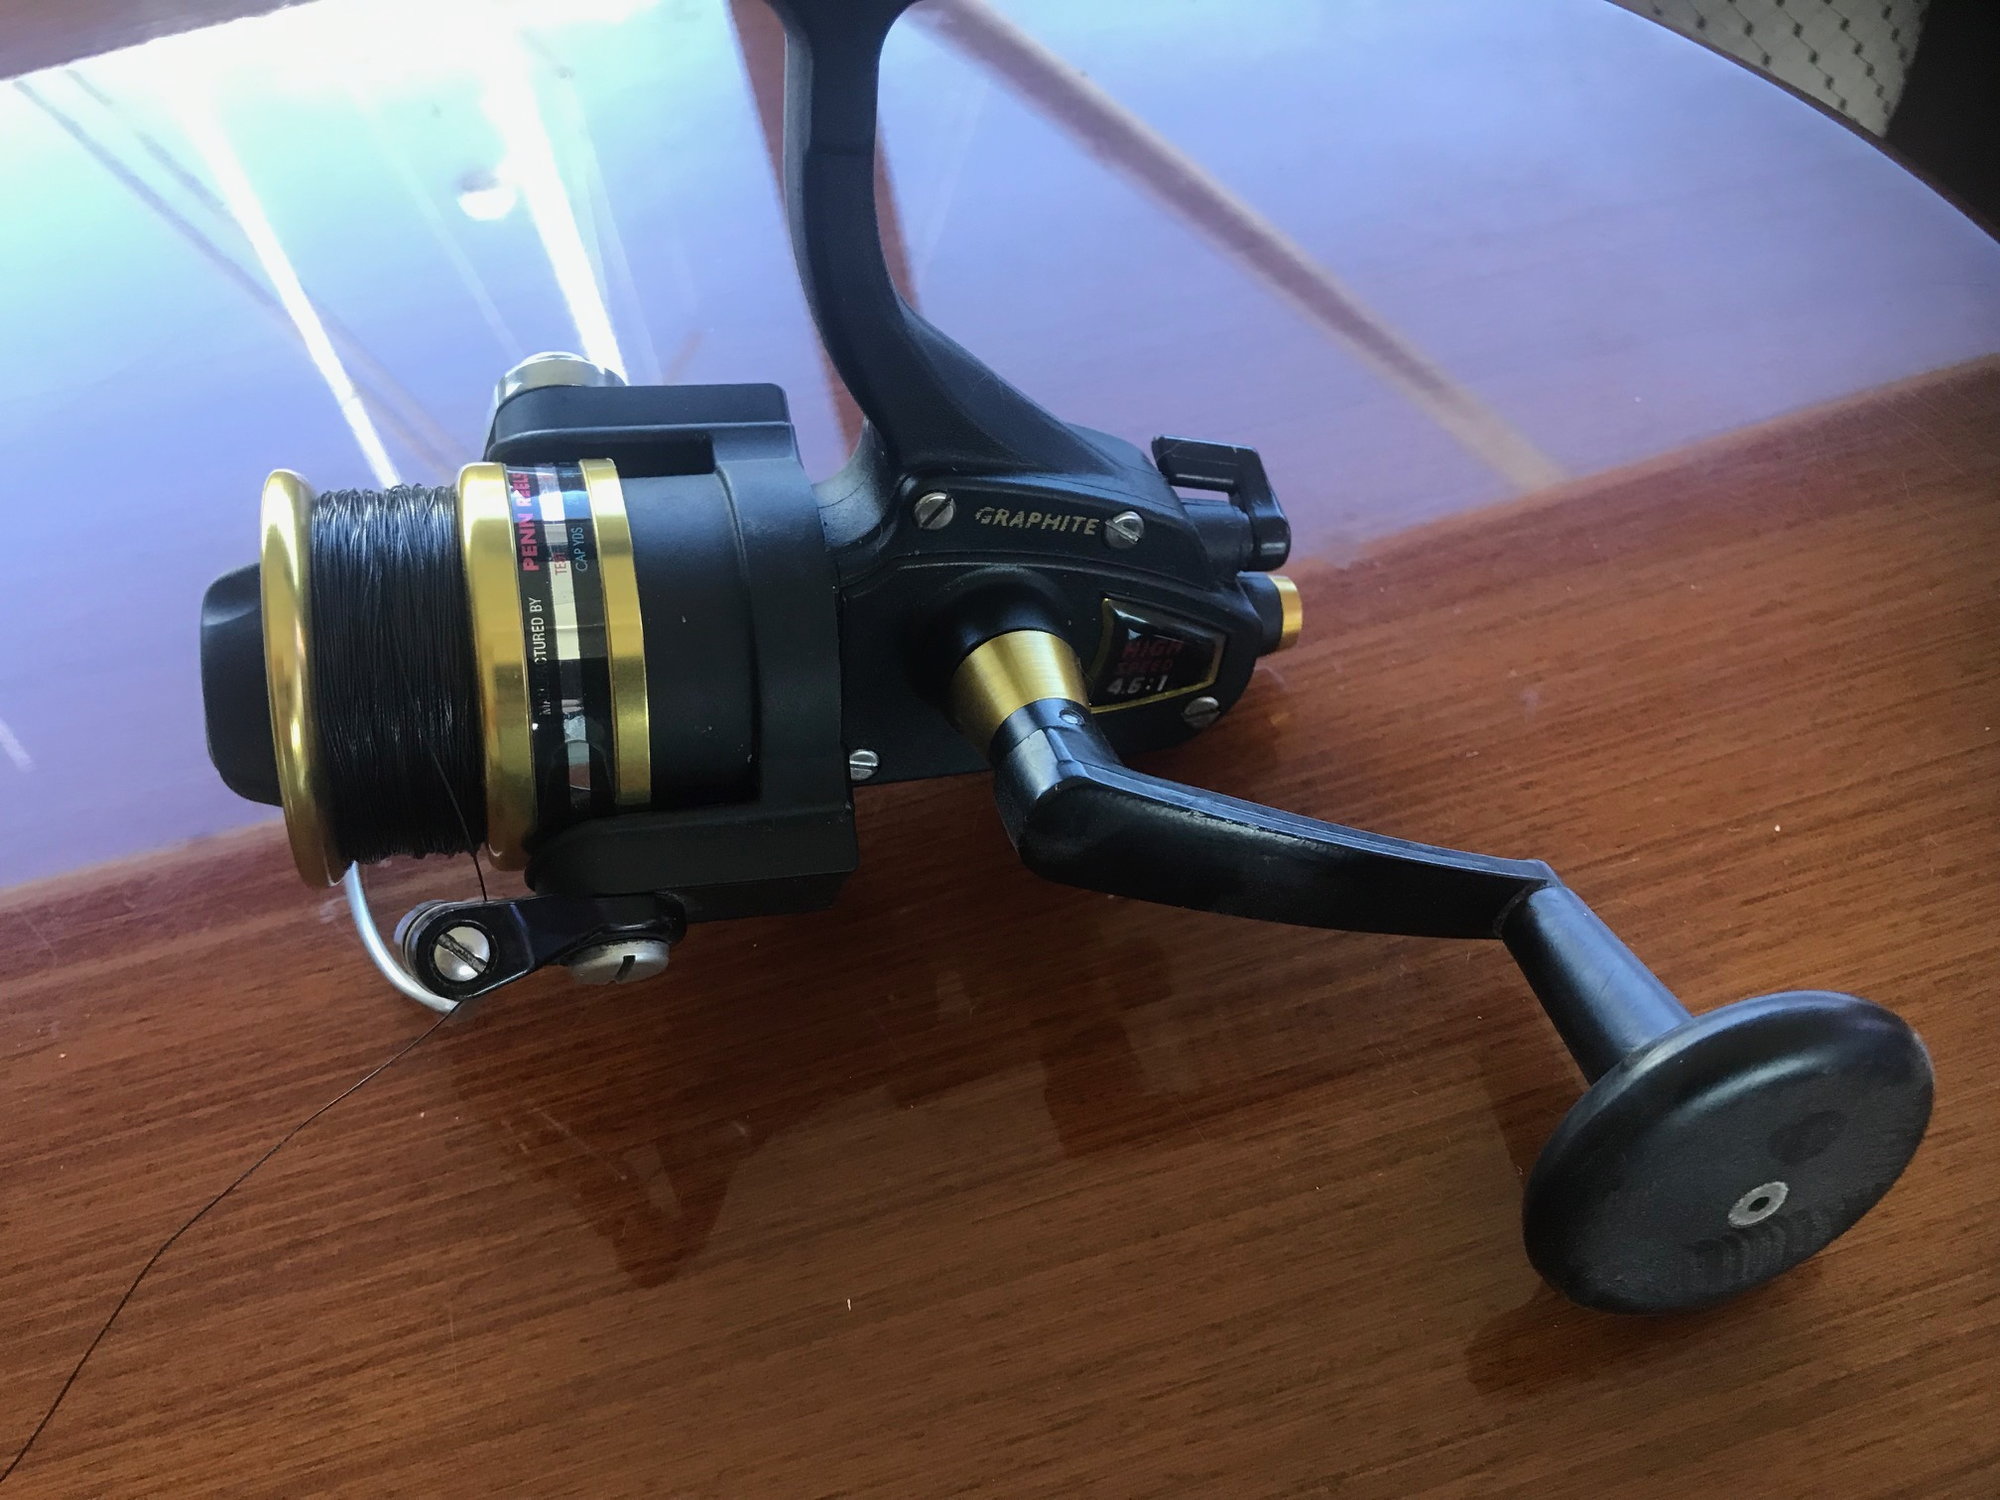 Quantum cabo 80: Reel guru review - The Hull Truth - Boating and